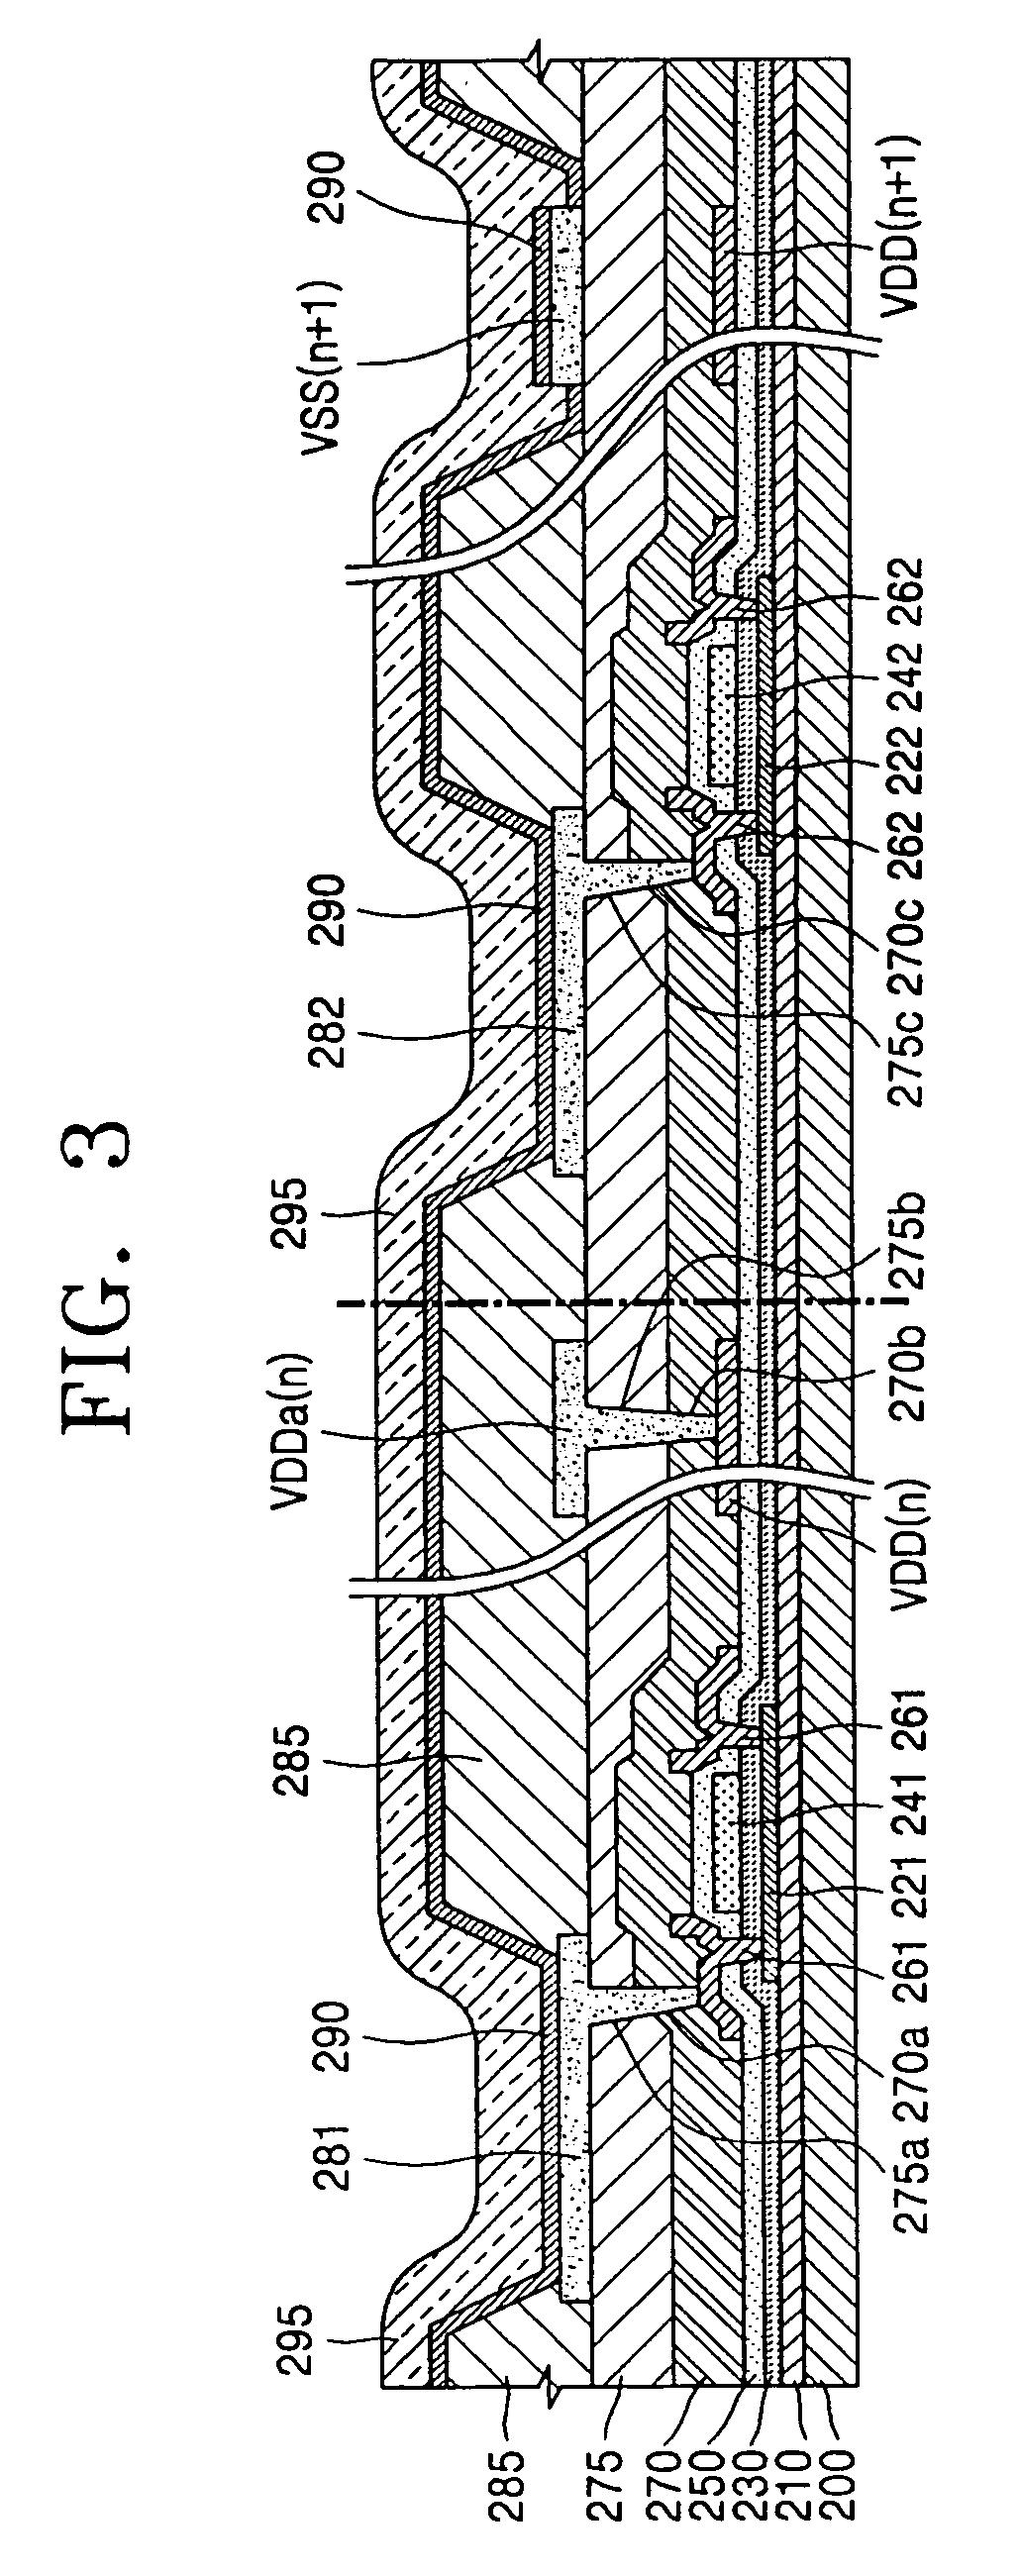 Organic electro-luminescent display device and method of manufacturing the same